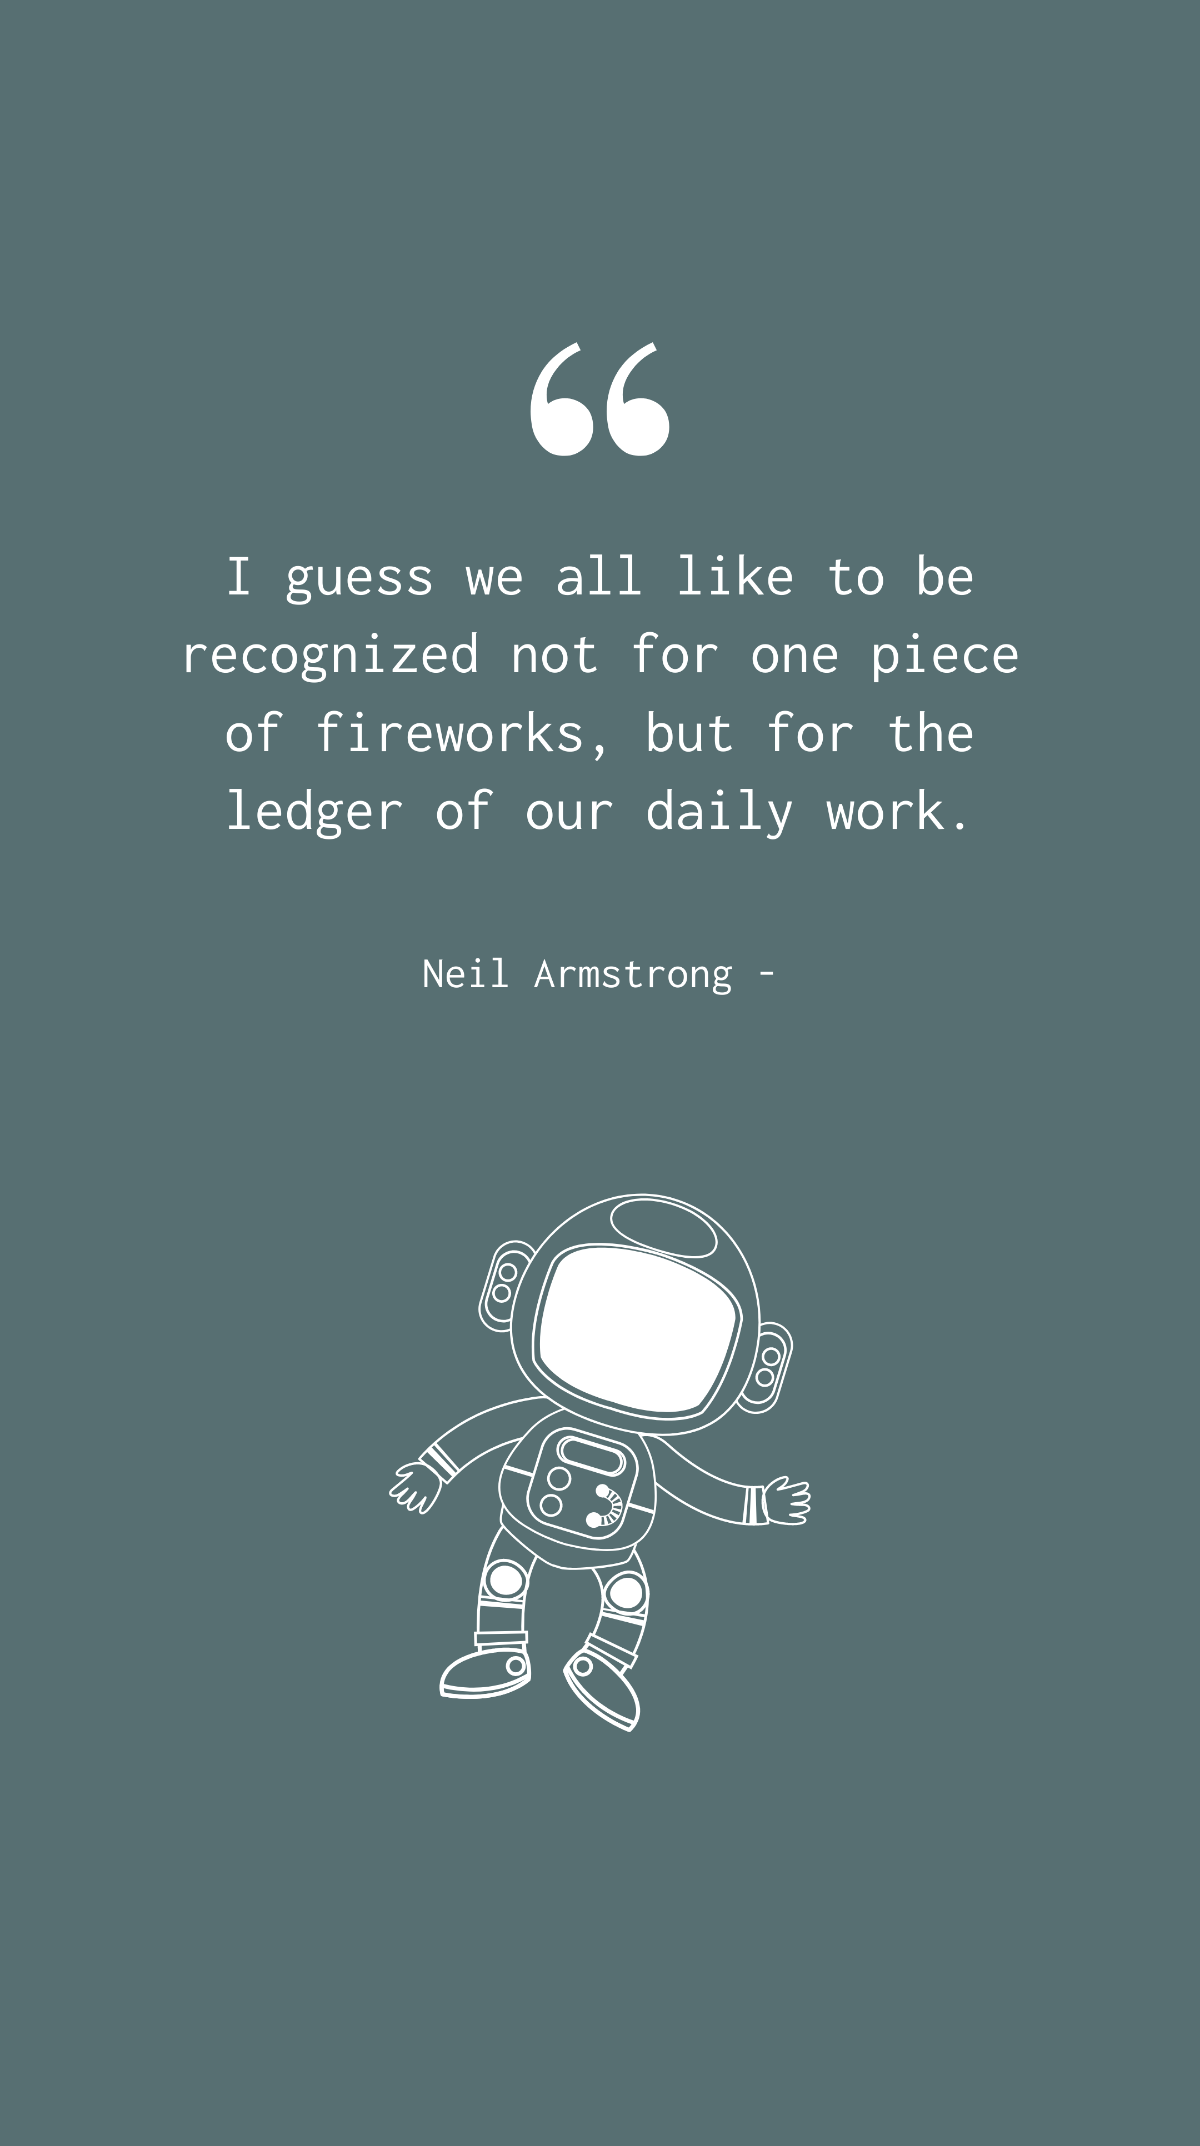 Neil Armstrong - I guess we all like to be recognized not for one piece of fireworks, but for the ledger of our daily work. Template